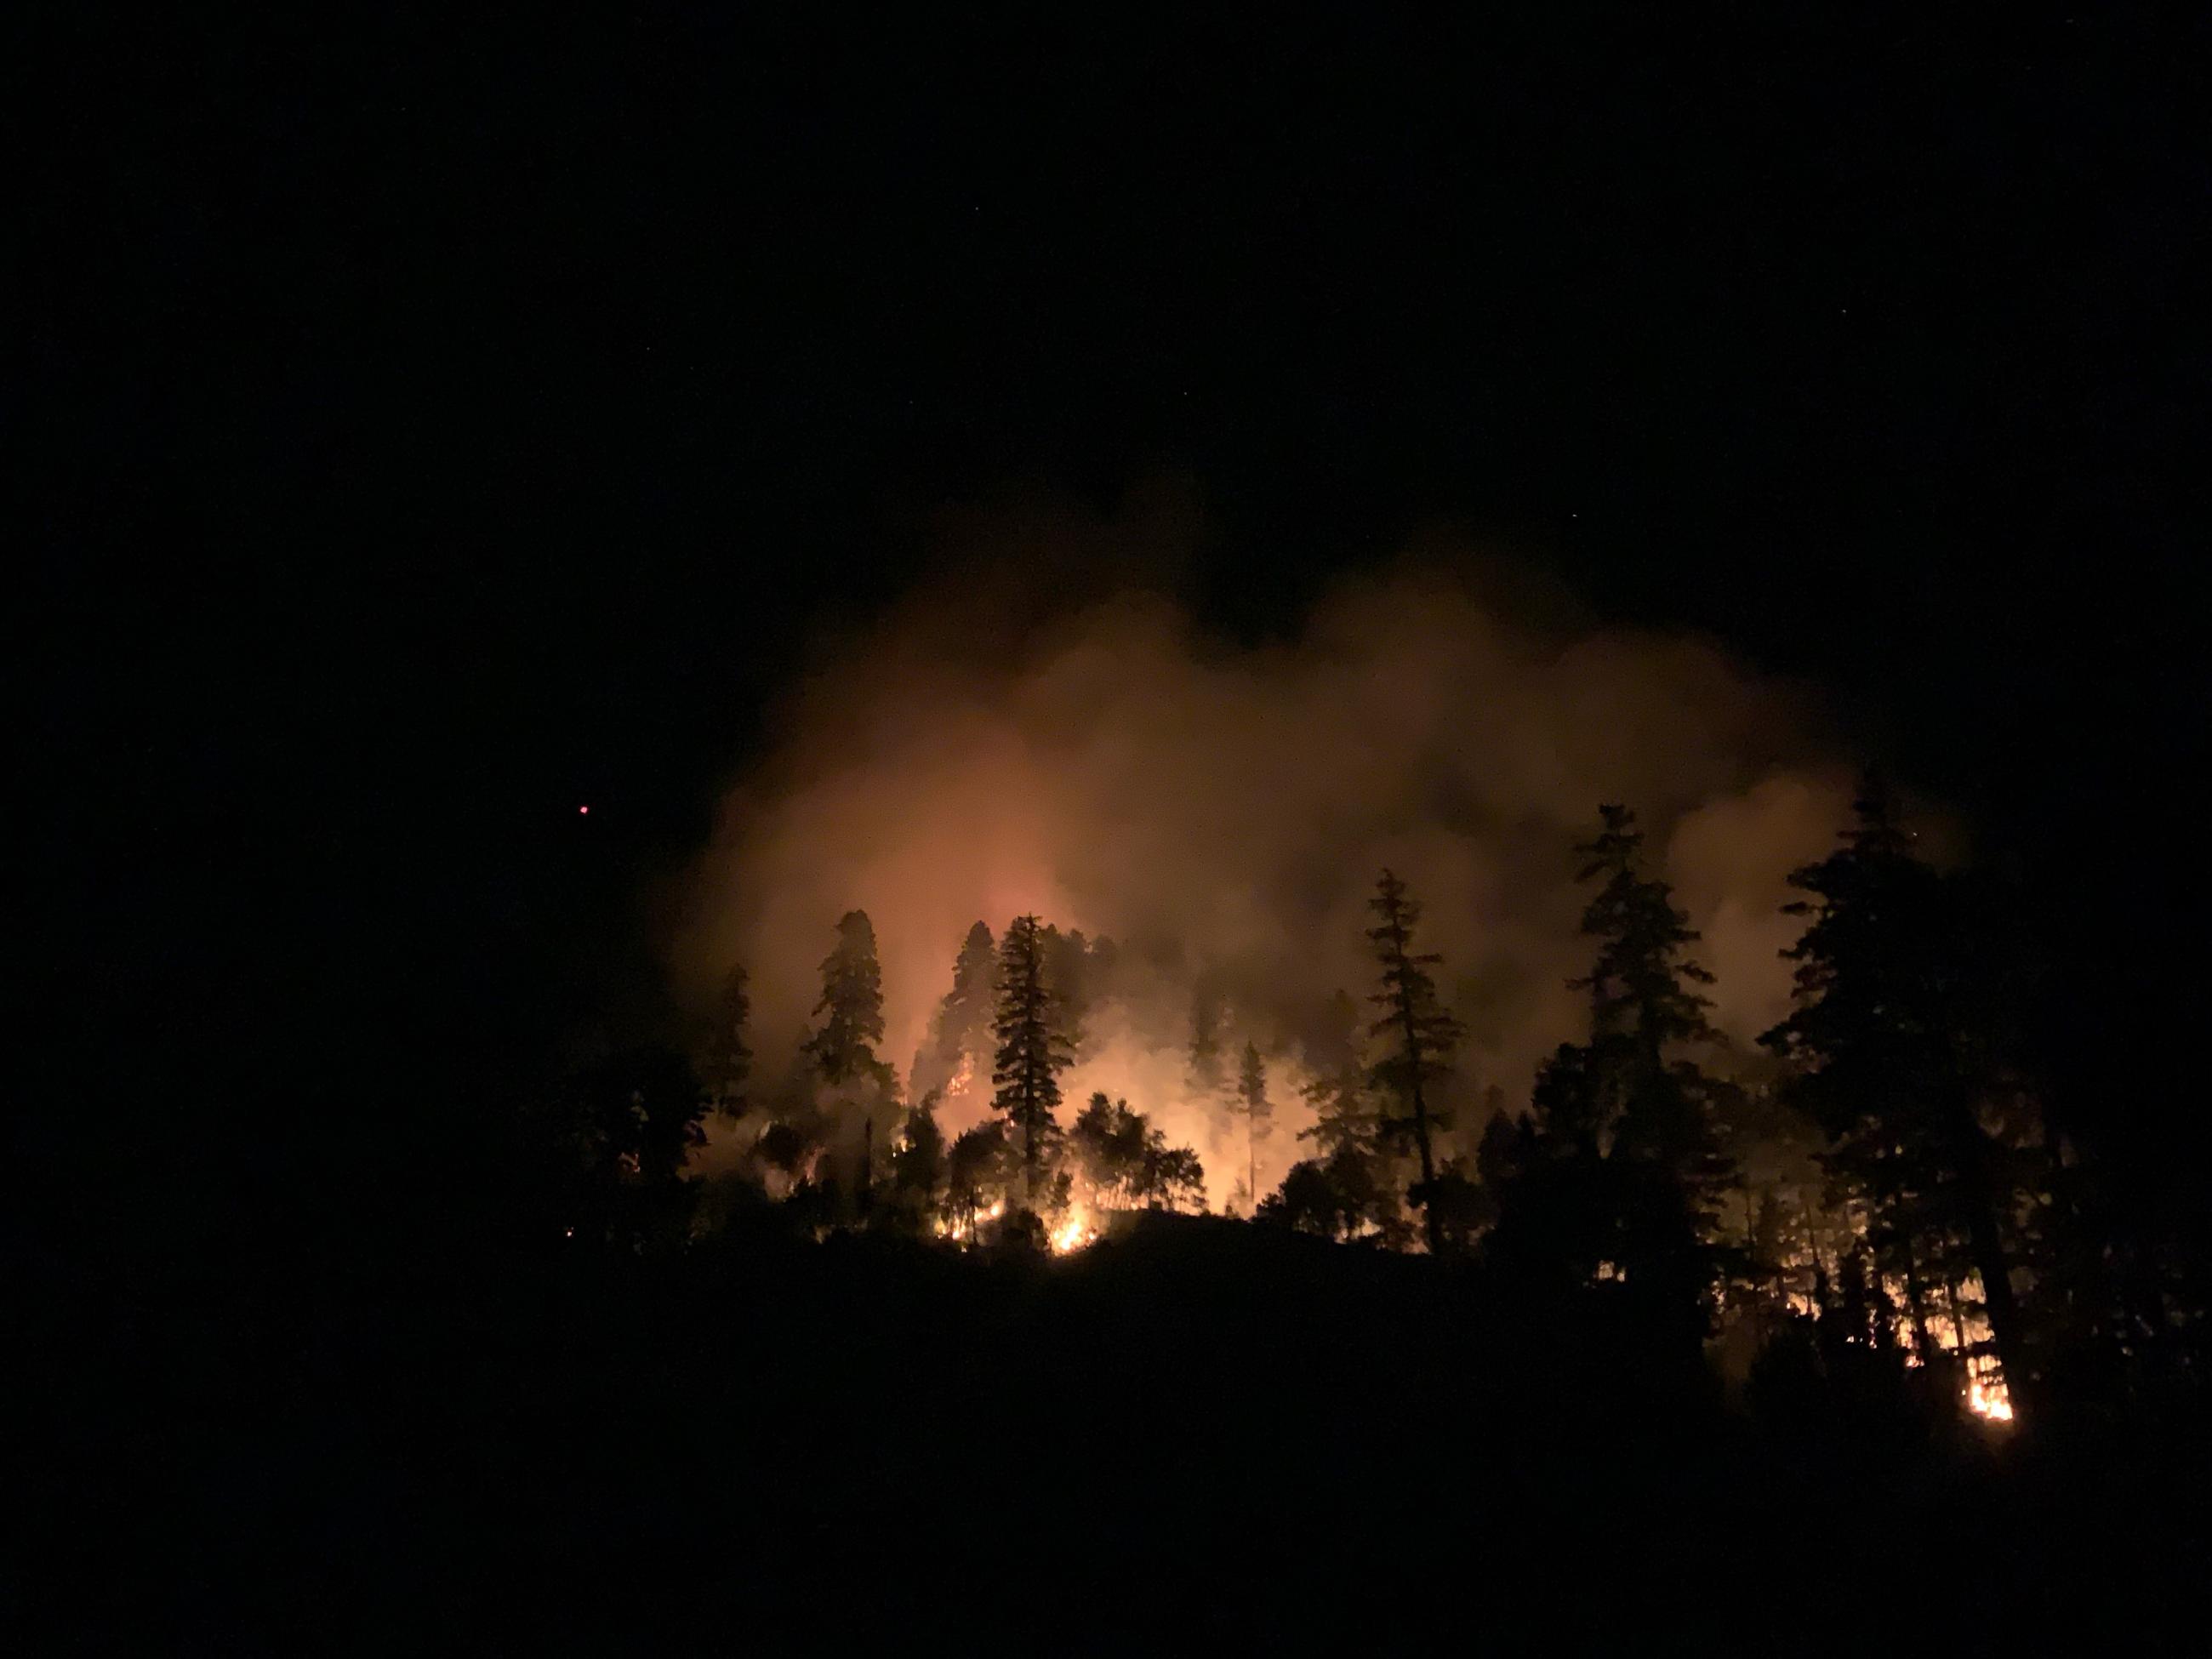 Glowing fire at night from the Illinois River area on the Rogue River - Siskiyou National Forest 